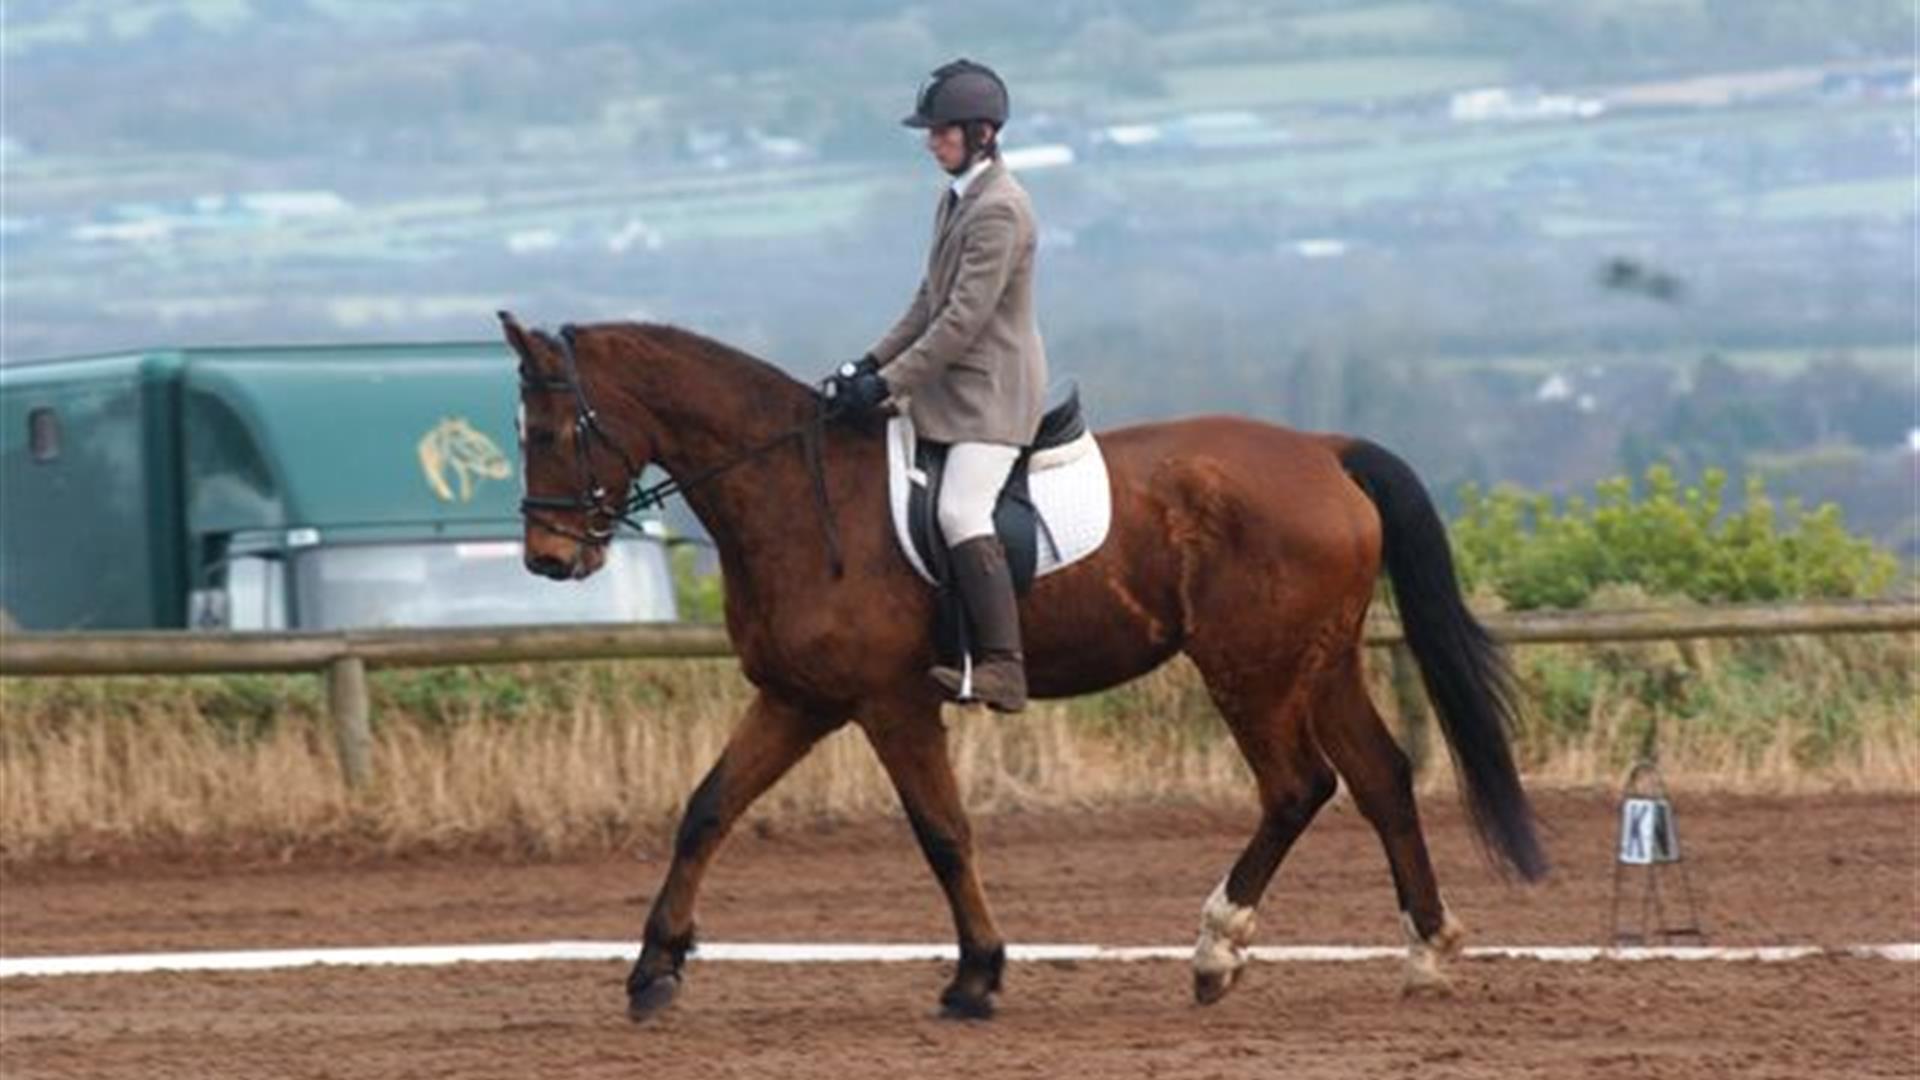 Image shows rider on a horse in a field with countryside in the background